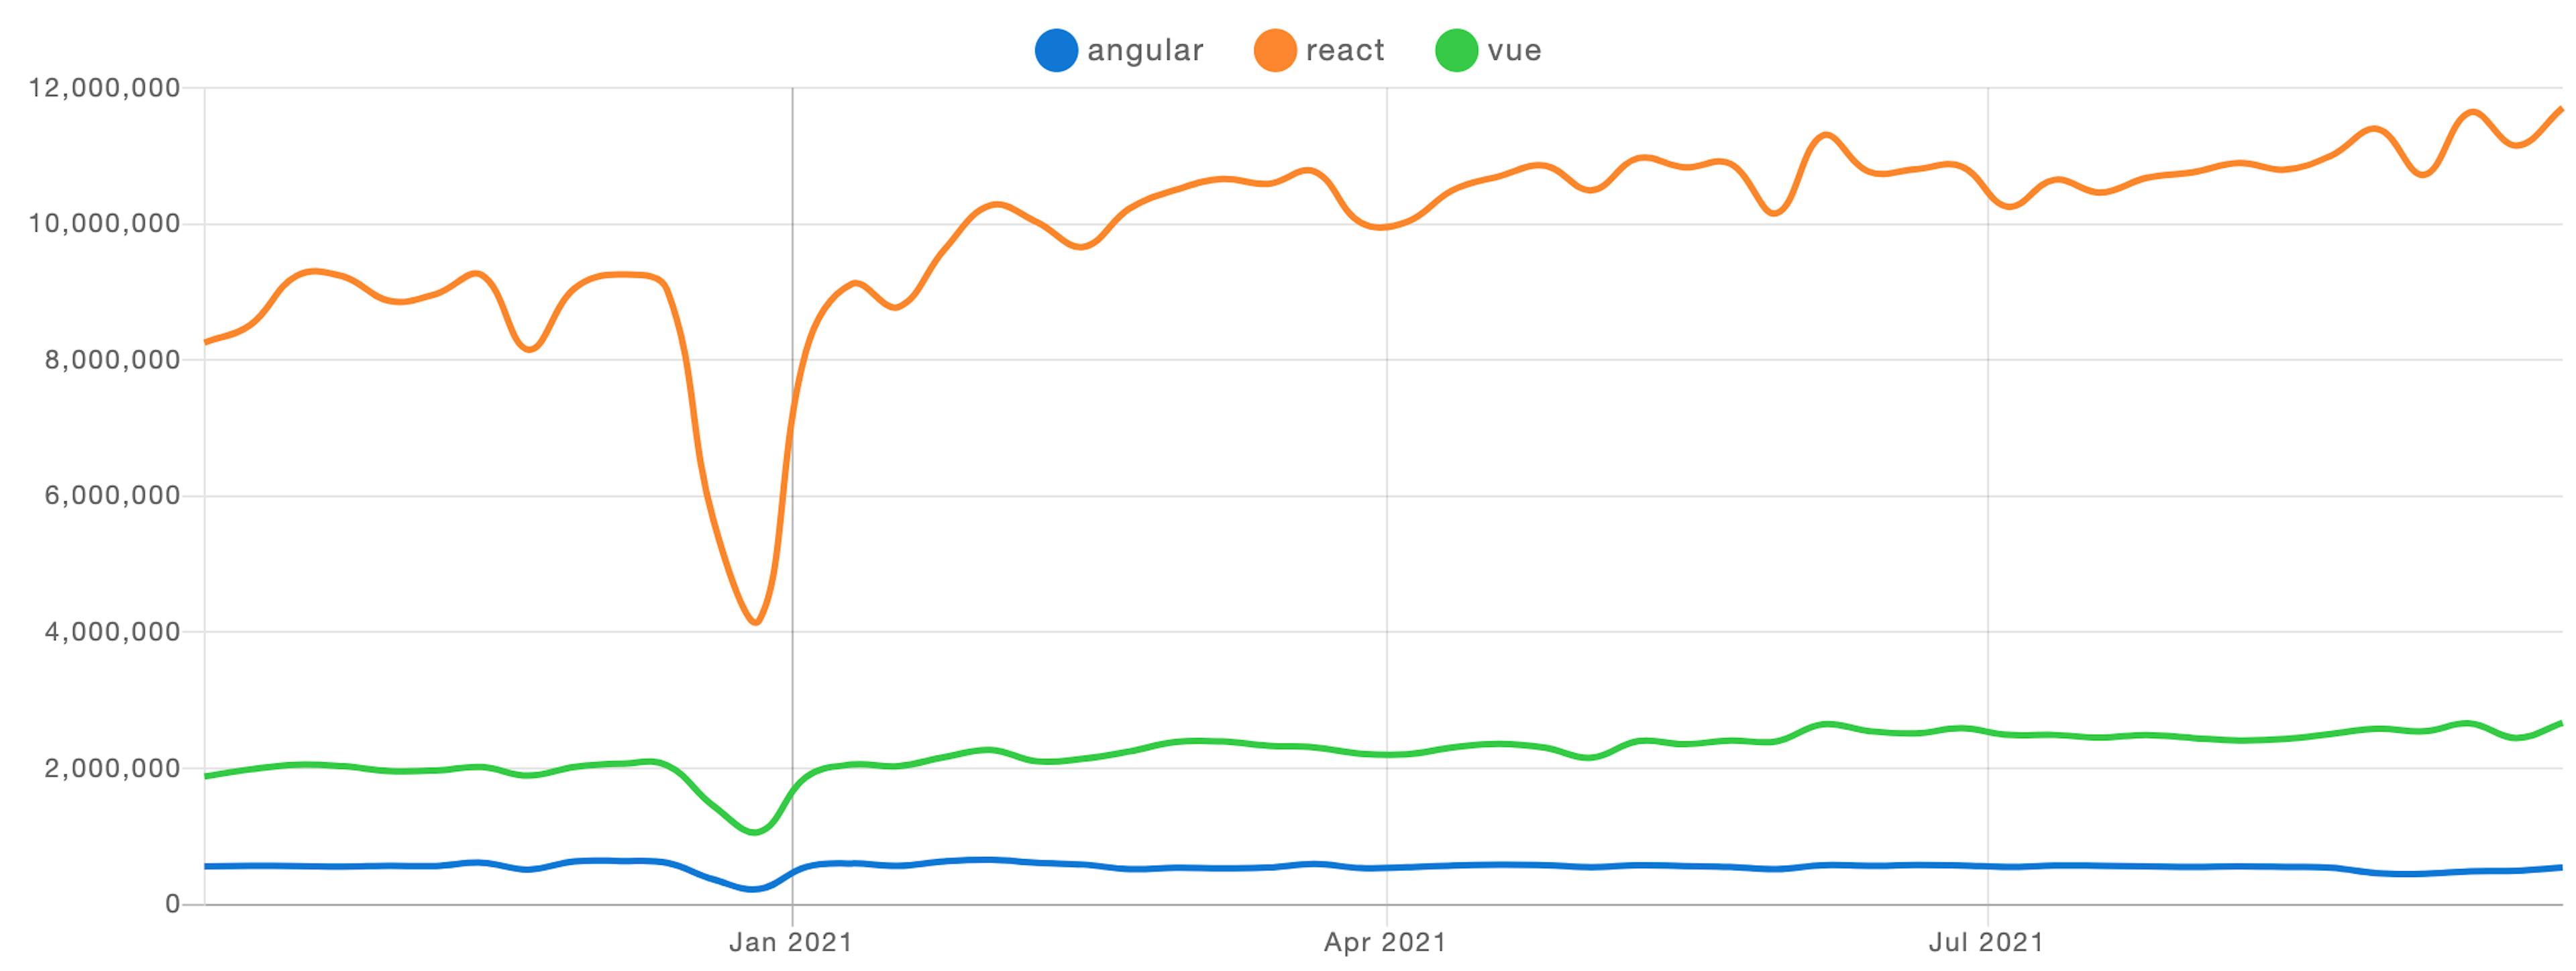 NPM trends comparative analysis